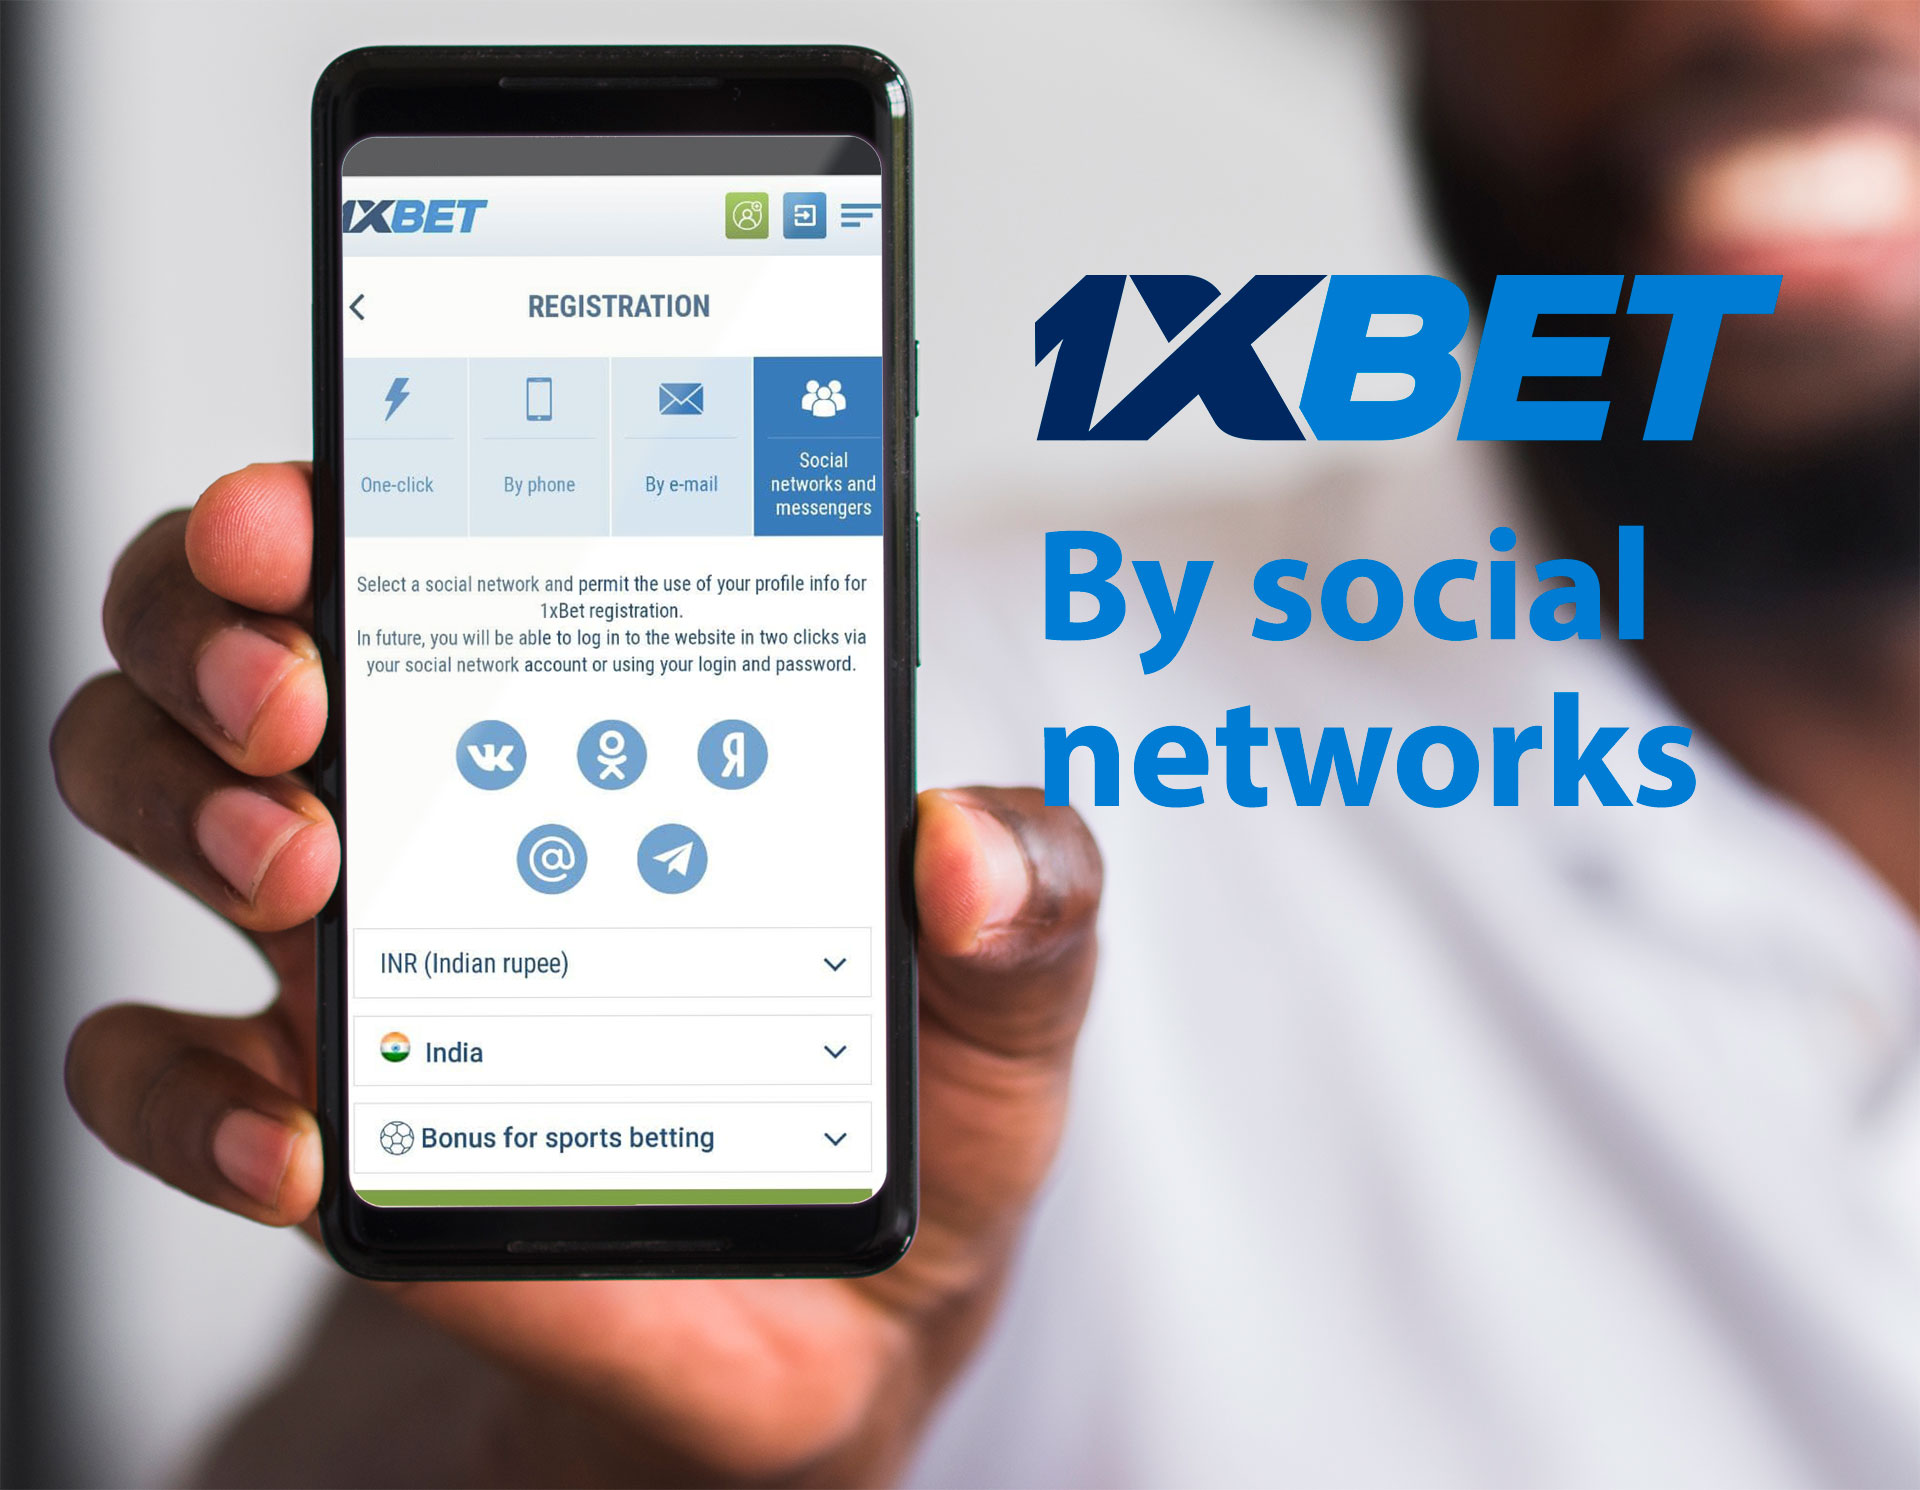 Social networks is another great way for quick registration in 1xbet.